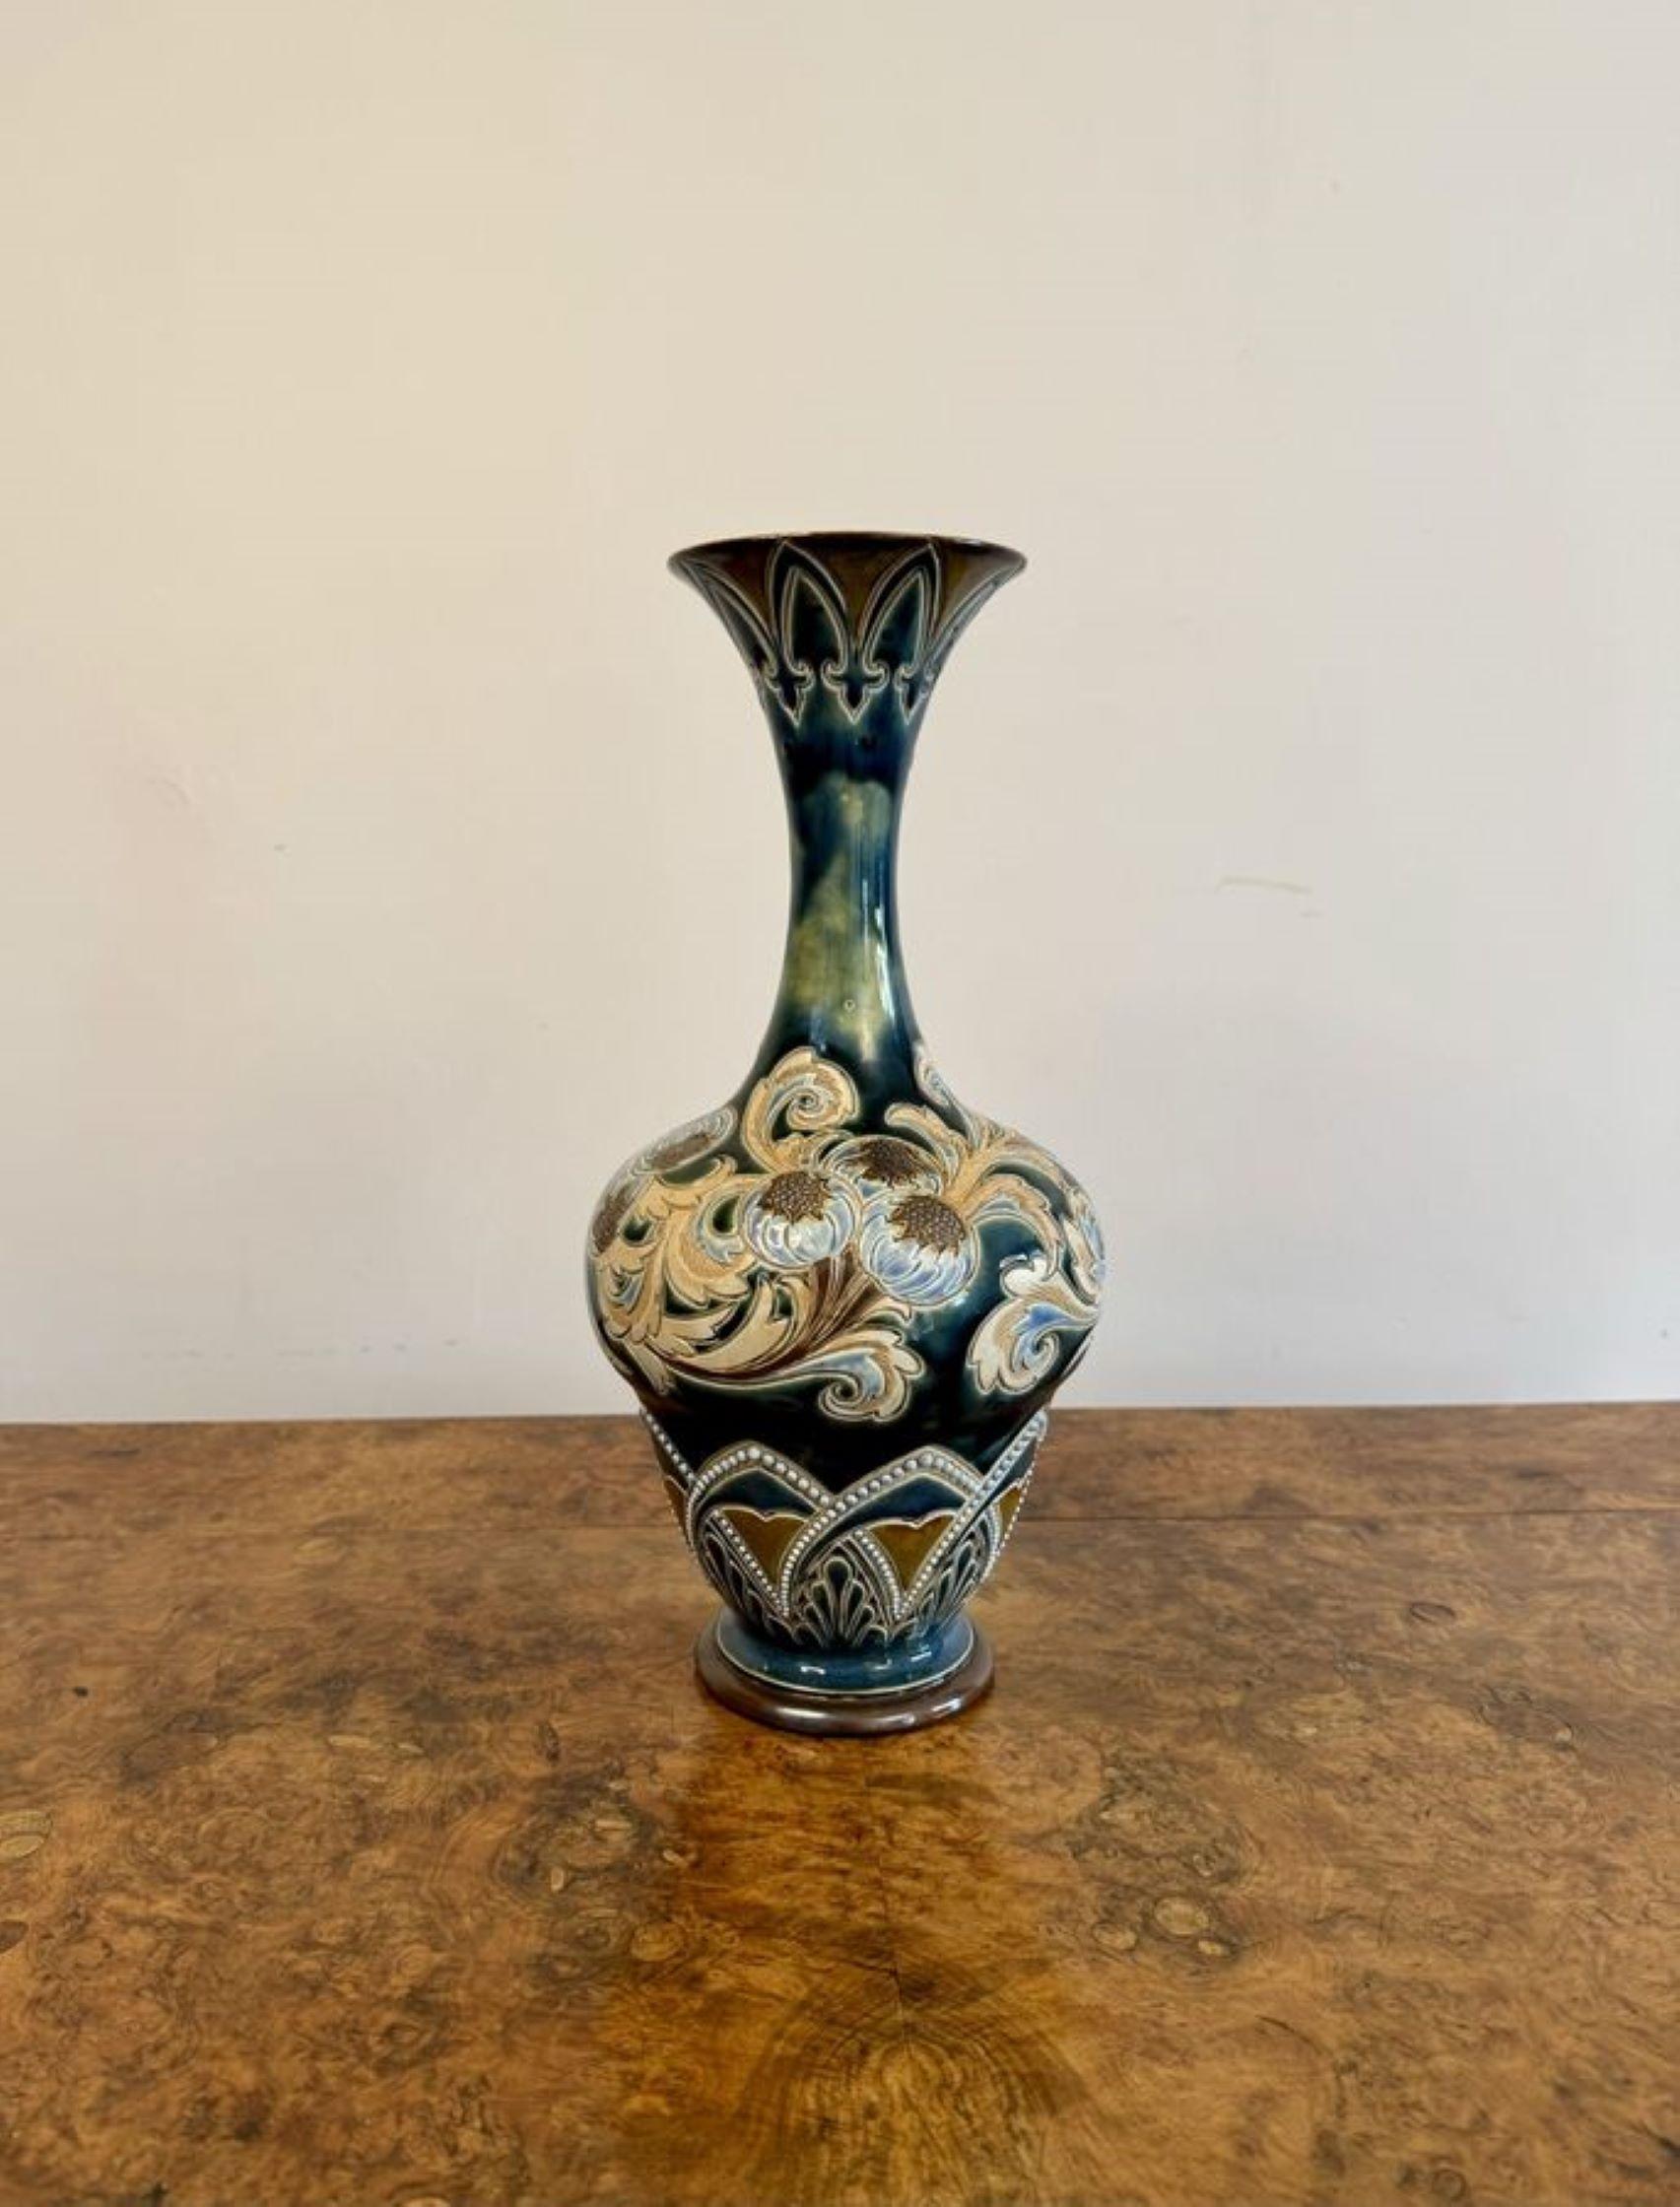 Attractive quality antique Doulton lambeth vase by Eliza Simmance, having an outstanding quality vase with a bulbous body and a fluted neck decorated with flowers, leaves and patterns in fantastic green, blue and brown colours. 
Stamped and signed